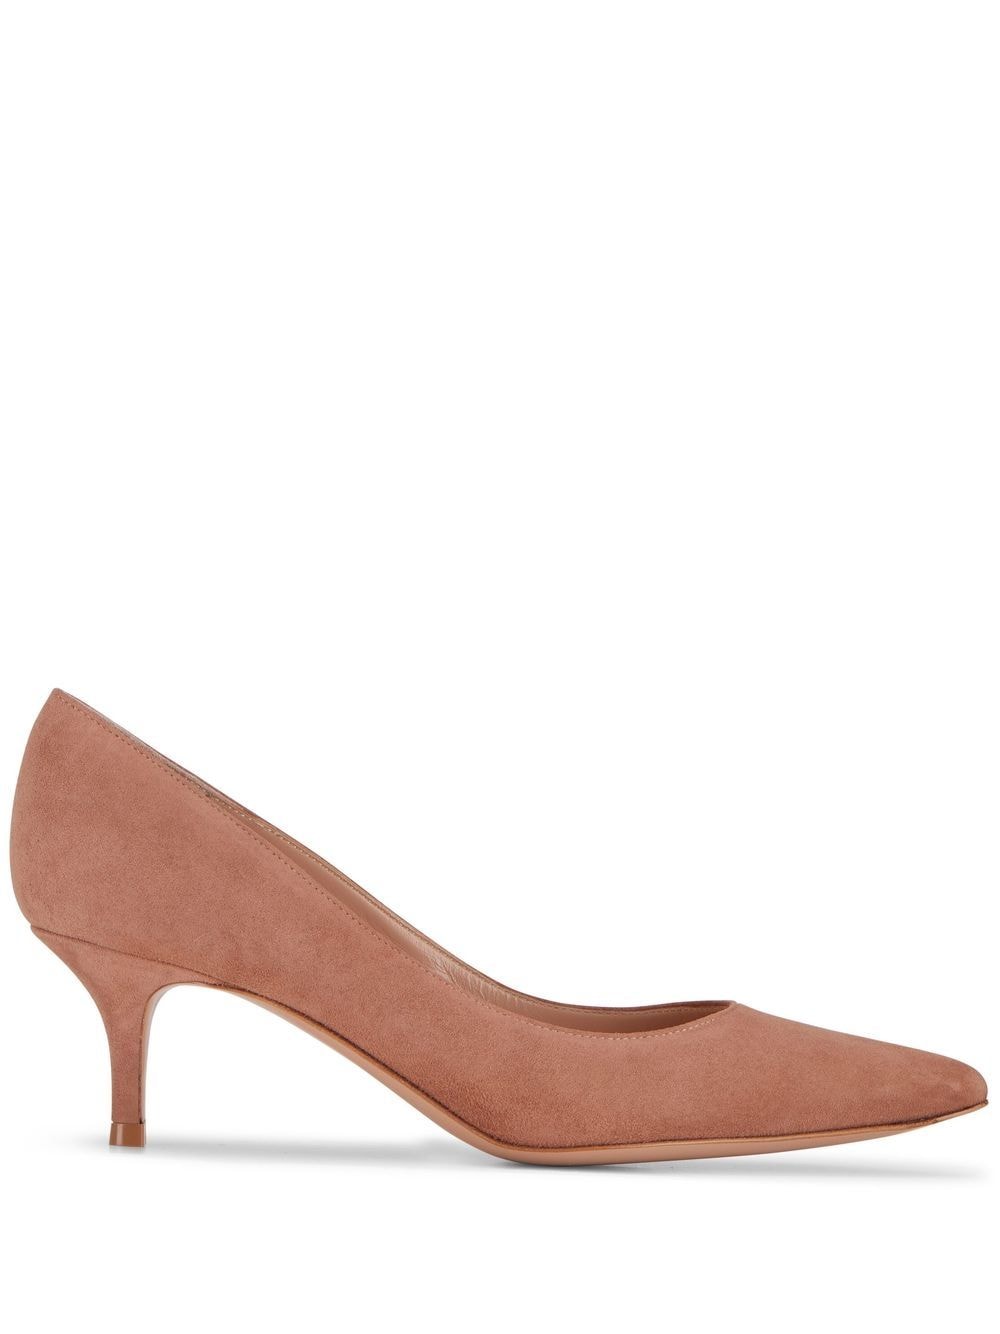 Image 2 of Gianvito Rossi pointed-toe suede pumps